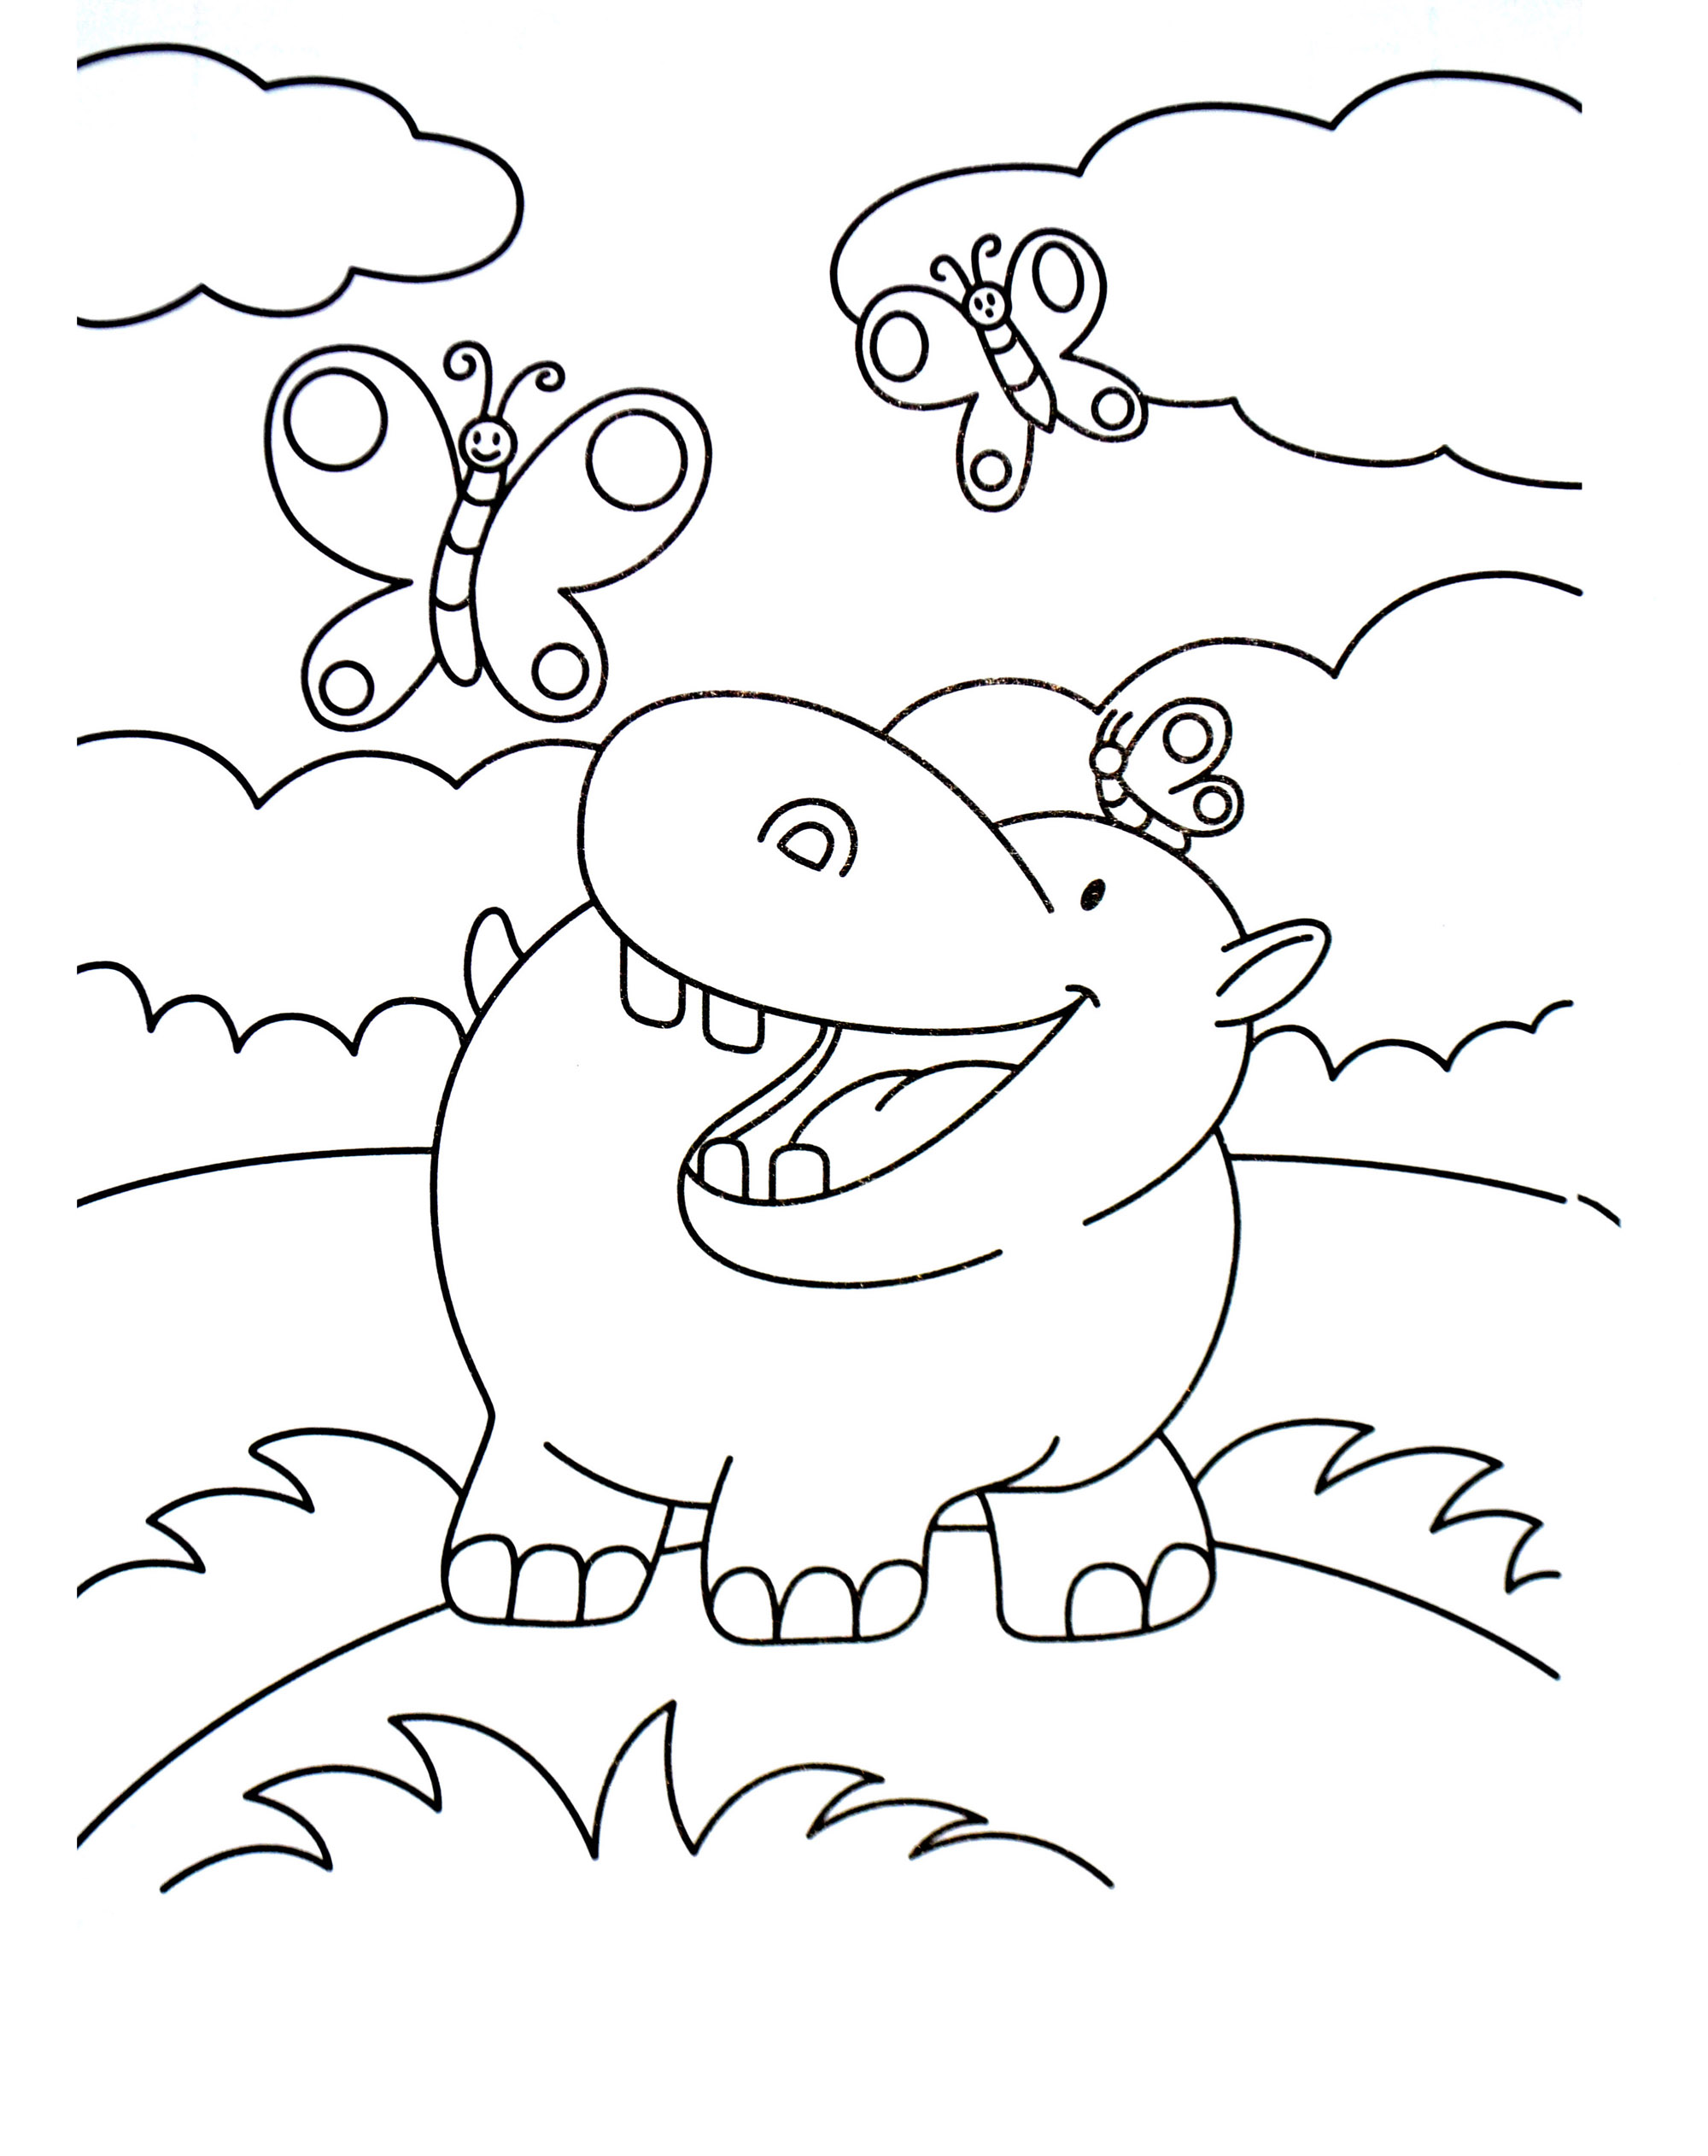 Simple drawing of a Hippopotamus playing with butterflies